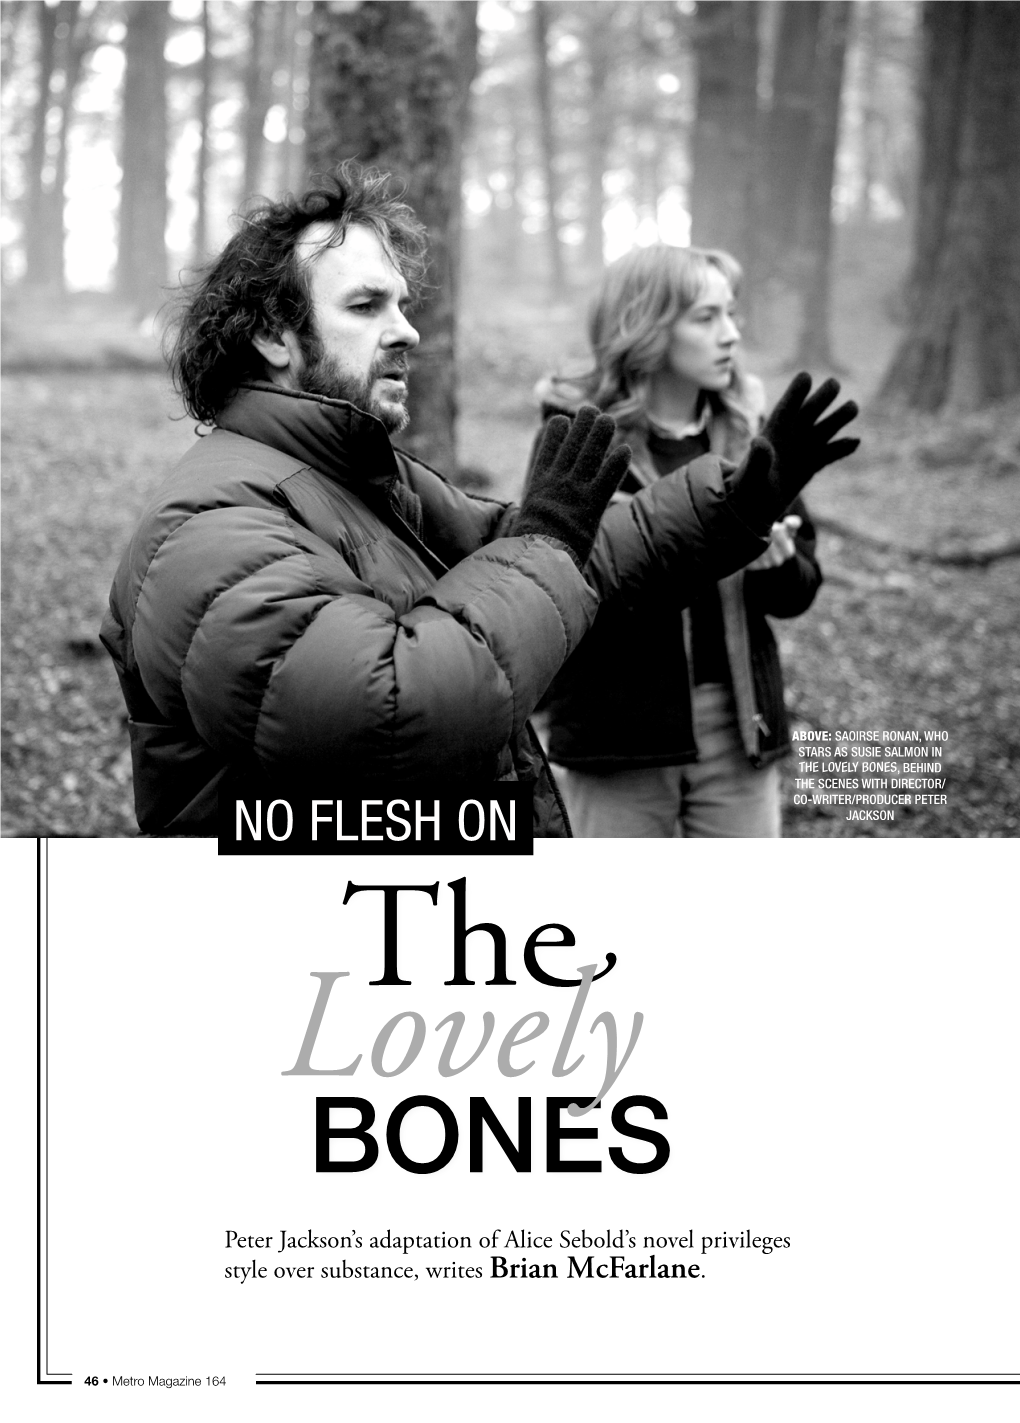 The Lovely Bones, Behind the Scenes with Director/ Co-Writer/Producer Peter No Flesh on Jackson the Lovely Bones